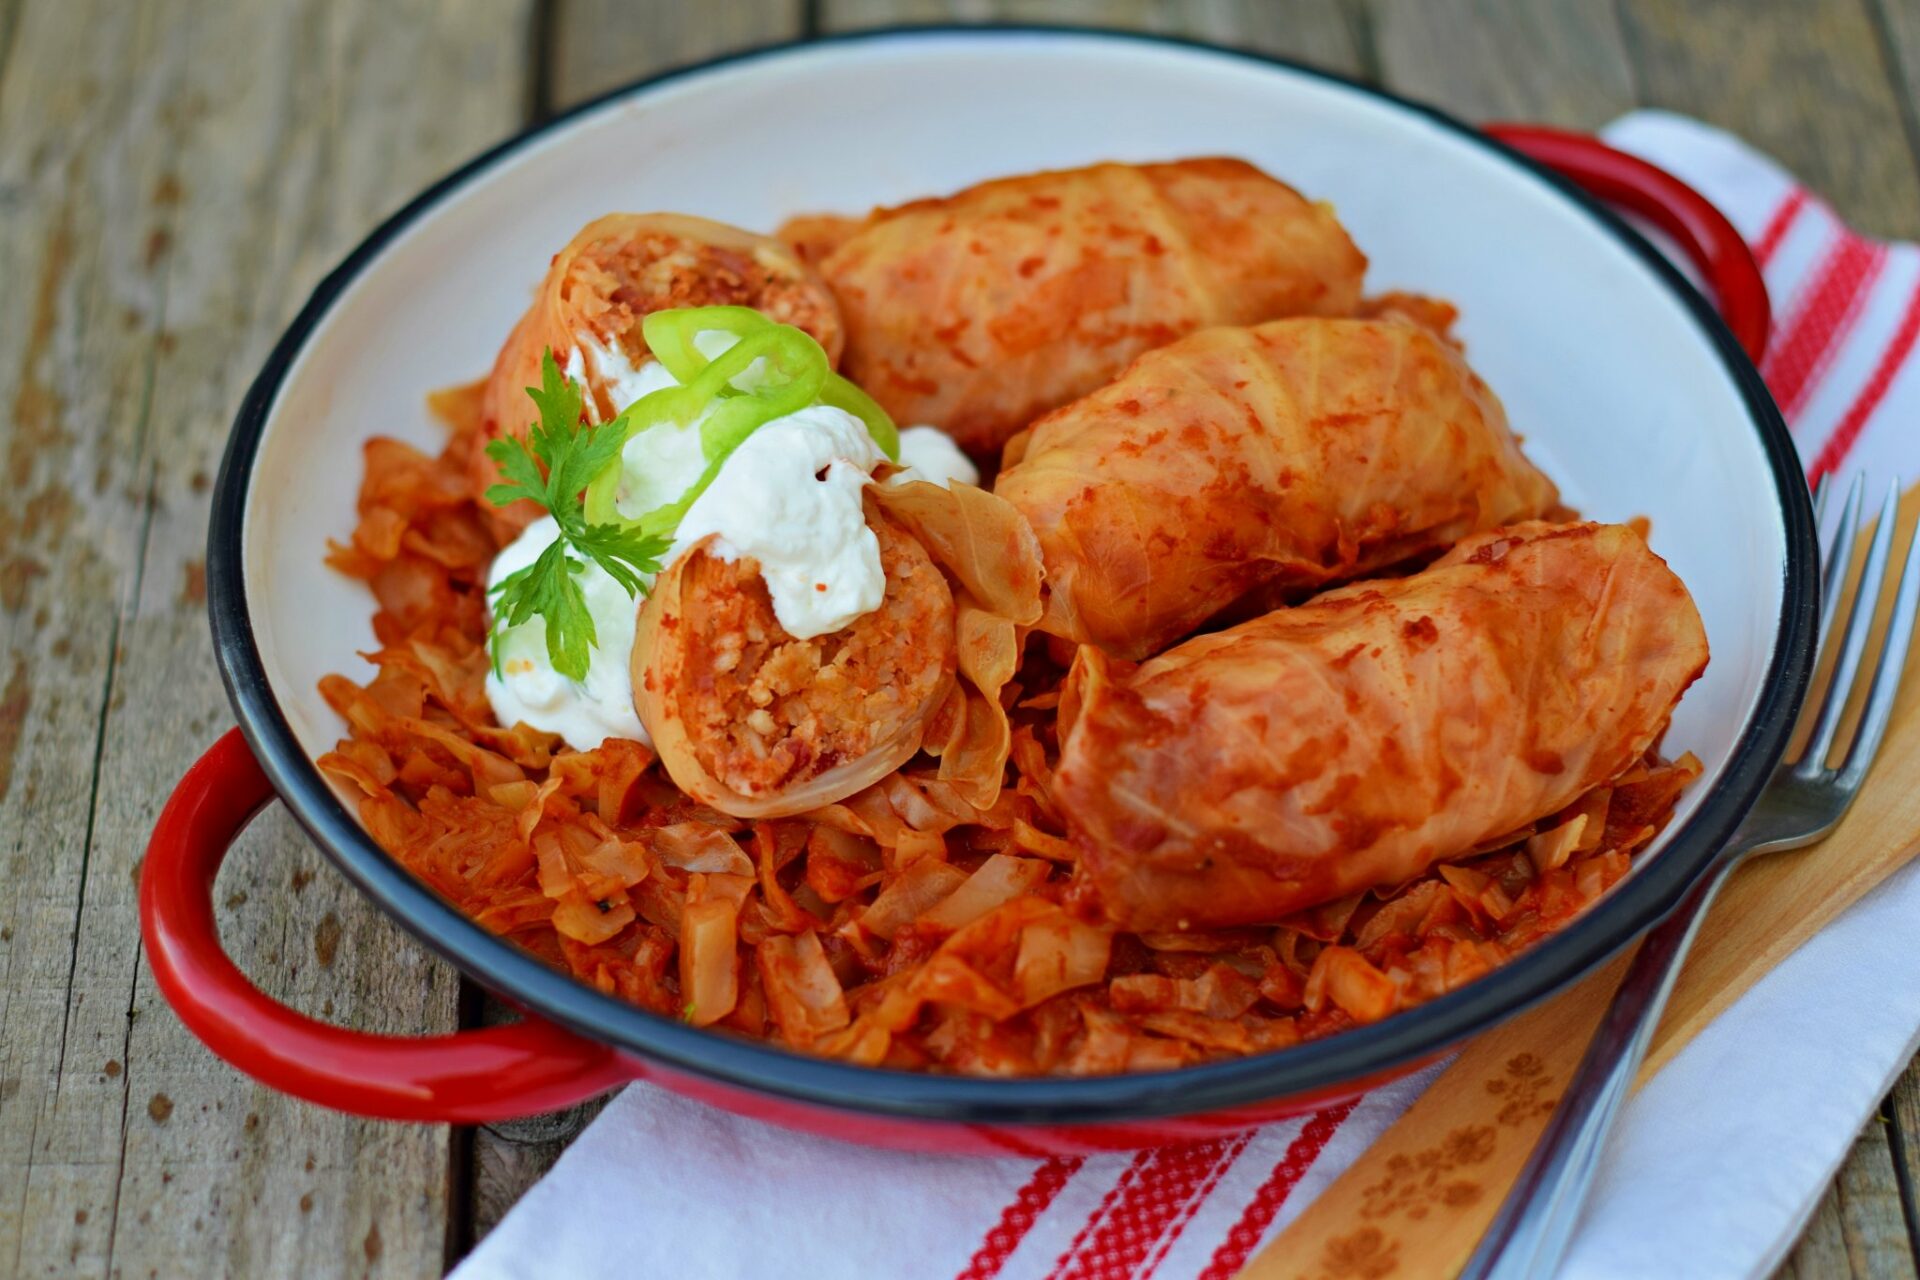 Hungarian stuffed cabbage rolls, a staple dish of the Magyars.